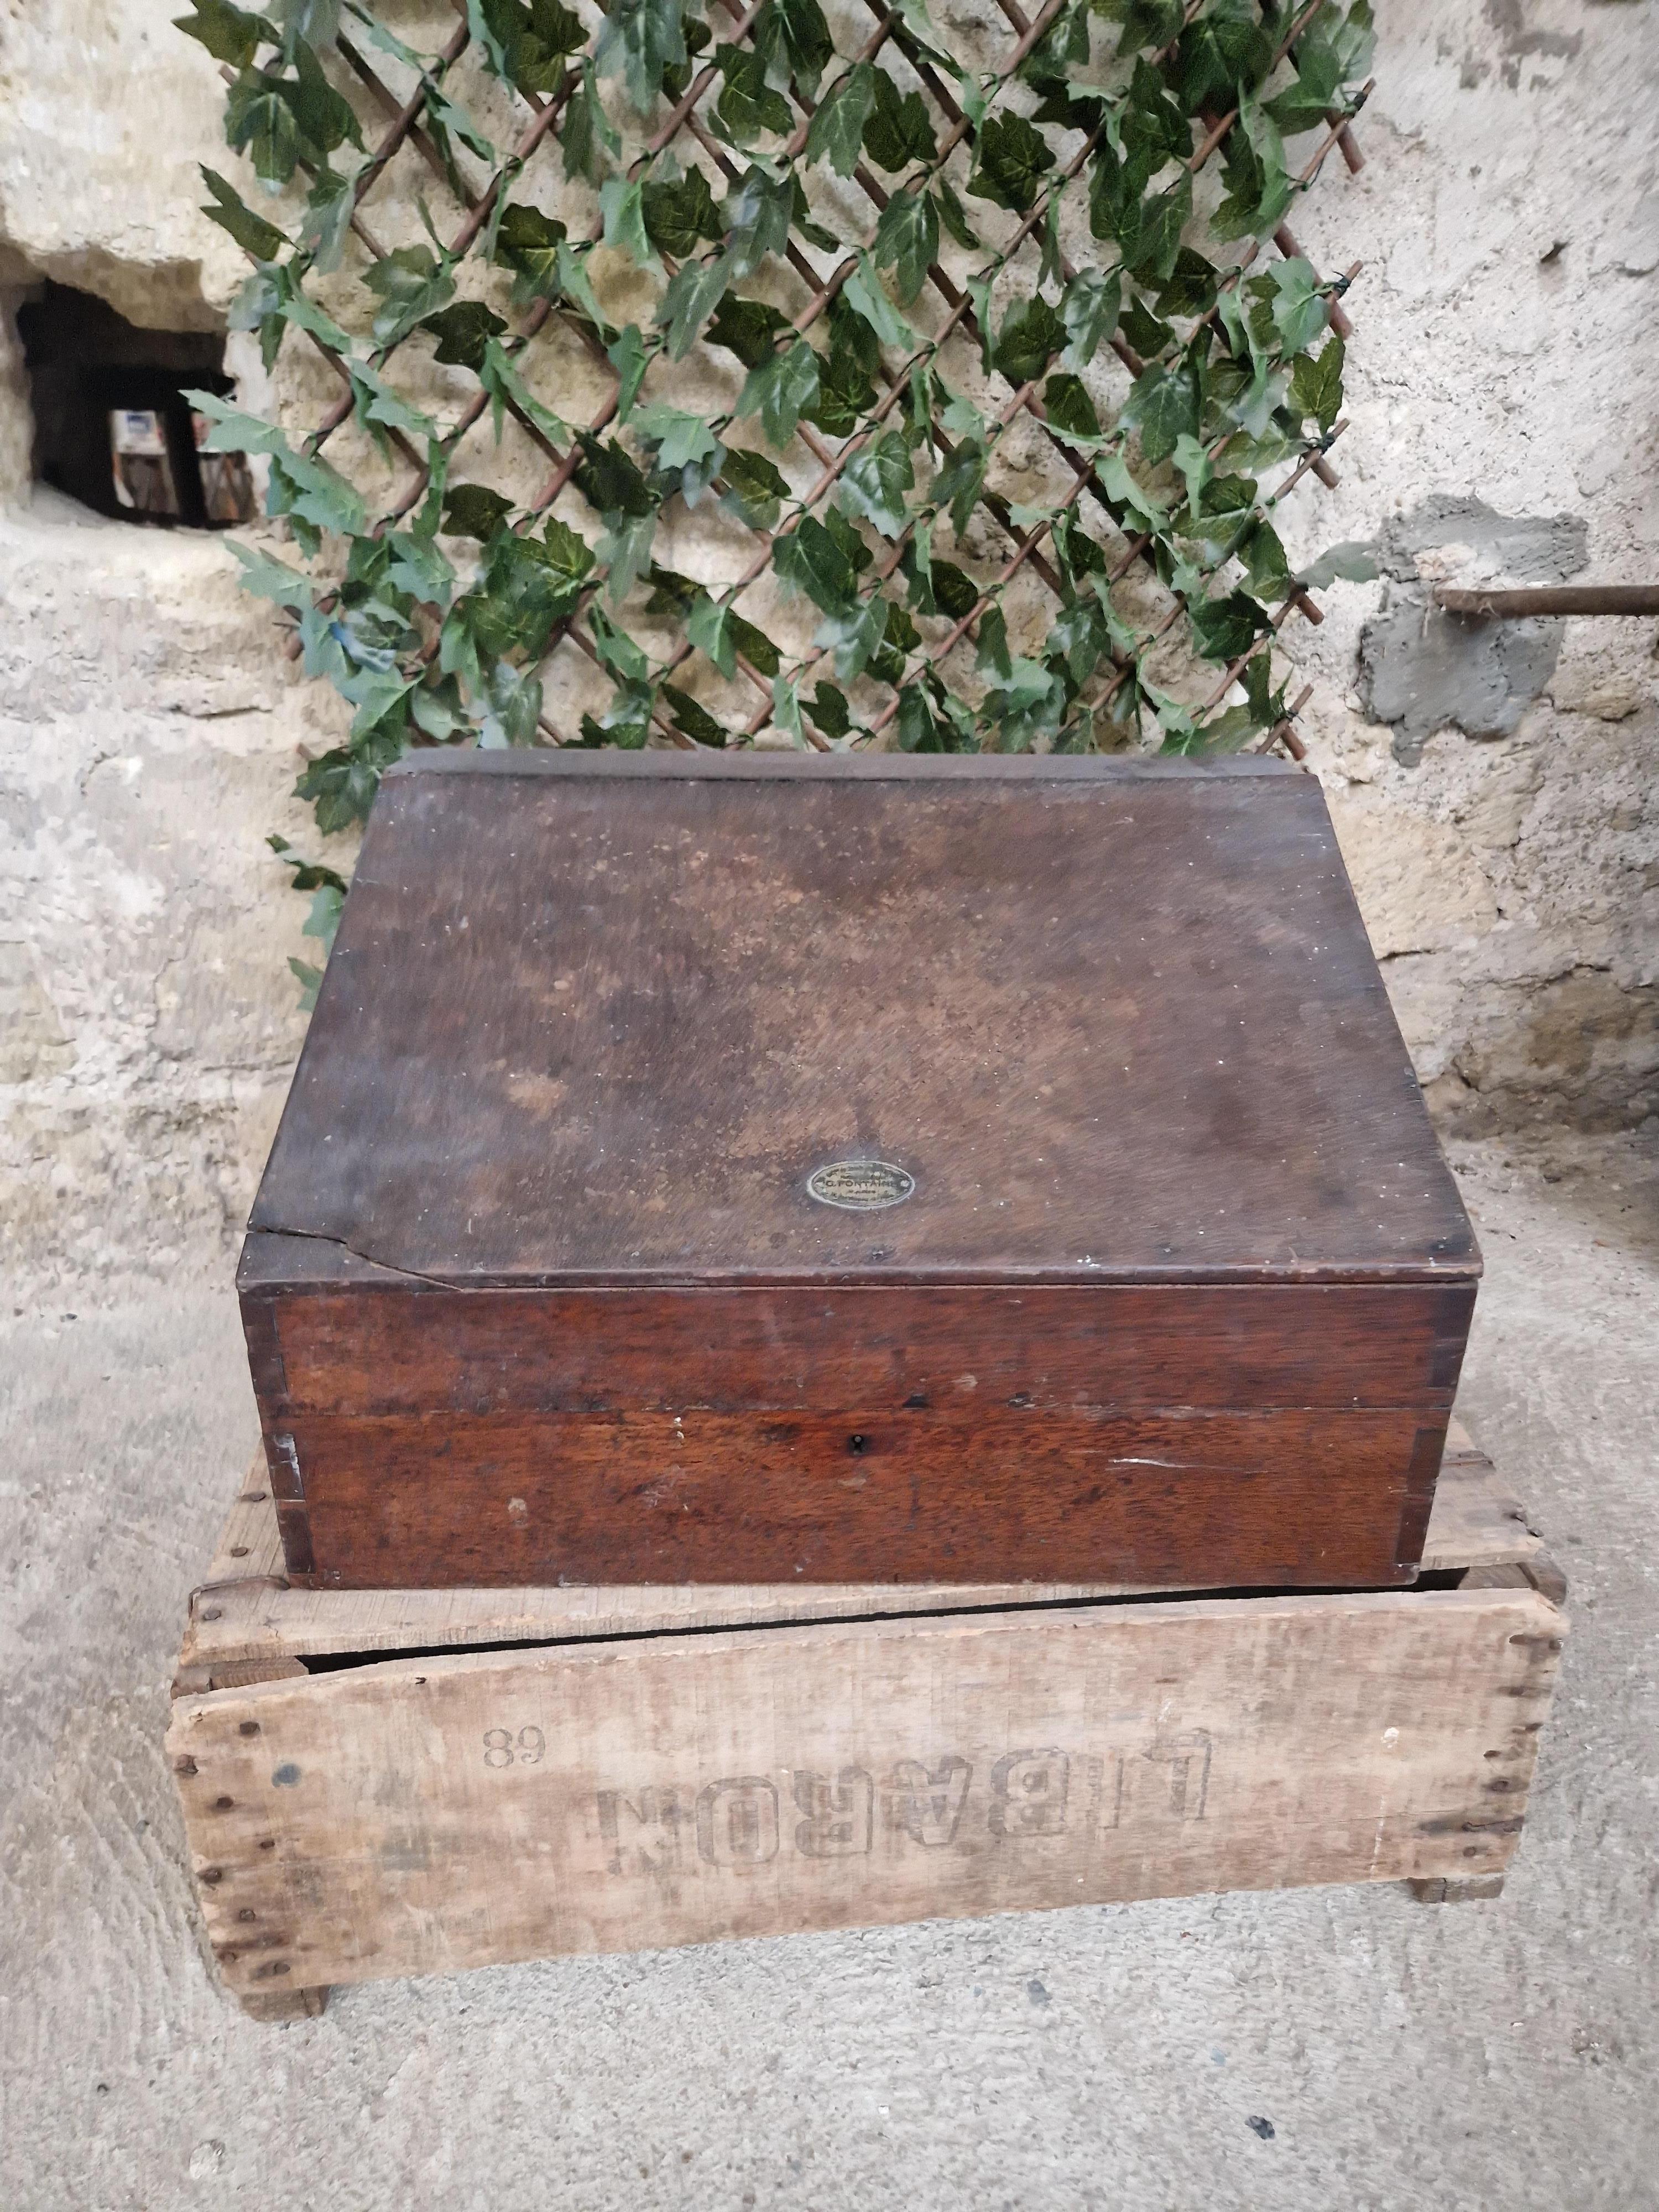 This antique French apothecary box is a rare find for collectors of scientific memorabilia. Made in the 19th century, this box has a unique design that is perfect for any apothecary or chemist enthusiast. The box was manufactured in Paris, France